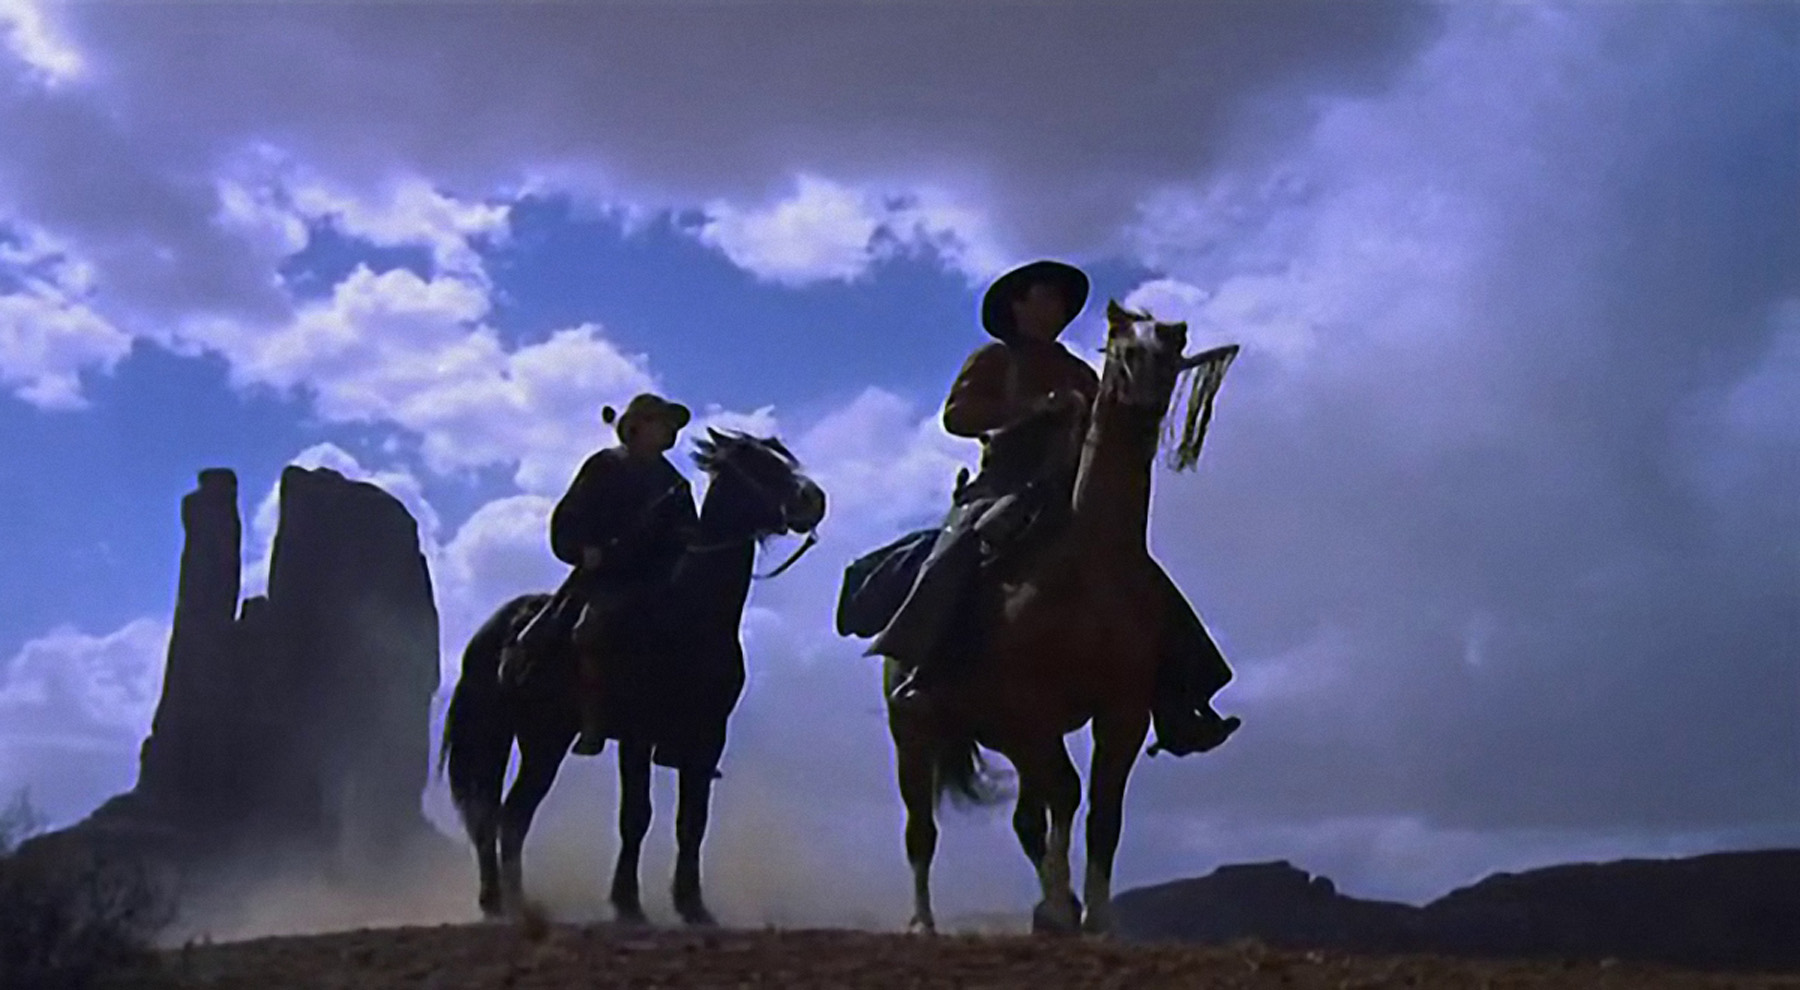 A still from The Searchers, 1956.